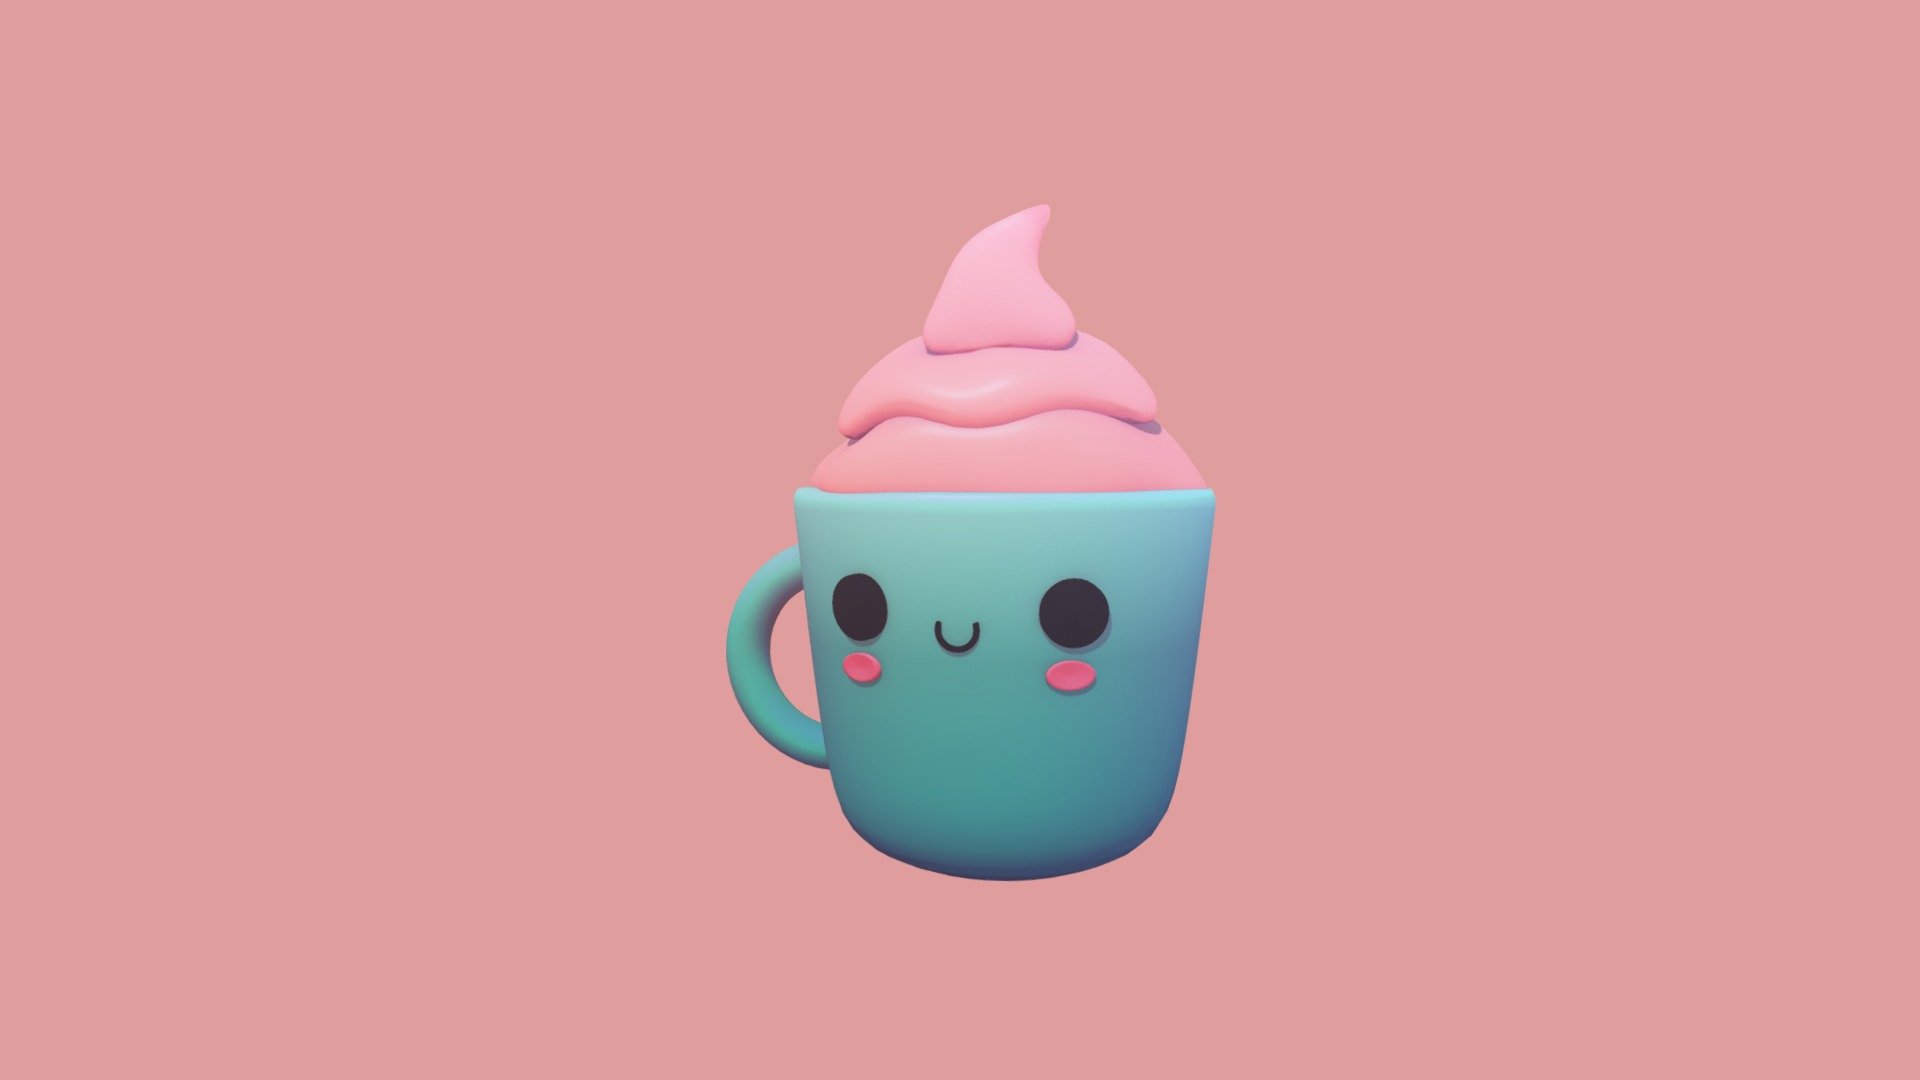 Cartoon Mug created in Blender.

This model is available in the following file formats:




.blend (Blender native format)

.fbx (Autodesk fbx)

.fbx (For Unity and Unreal Engine)

.obj (Object file con mtl)

.abc (Alembic)

.dae (Collada)

.stl (Stereolithography)

.usd (Universal Scene Description)

The file contains the 3D model and the textures, there is no light preset.
There is a zip with some renders in PNG format with alpha/transparency.

The UV map is Unwrapped and non-overlapping.
The polygons in the model are Quads.

Polygons




Verts 5417

Faces 5177

Tris 10365

The model has Base Color, Ambient occlusion, Metallic, Roughness, Specular, Normal DirectX and OpenGL Map.

The textures are in PNG format and they are available in different dimensions:




2048x2048

1024x1024

512x512

Dimensions of the 3D model: 1.75m x 1.44m x 2.27m - Cartoon mug - Buy Royalty Free 3D model by GattalupaGames 3d model